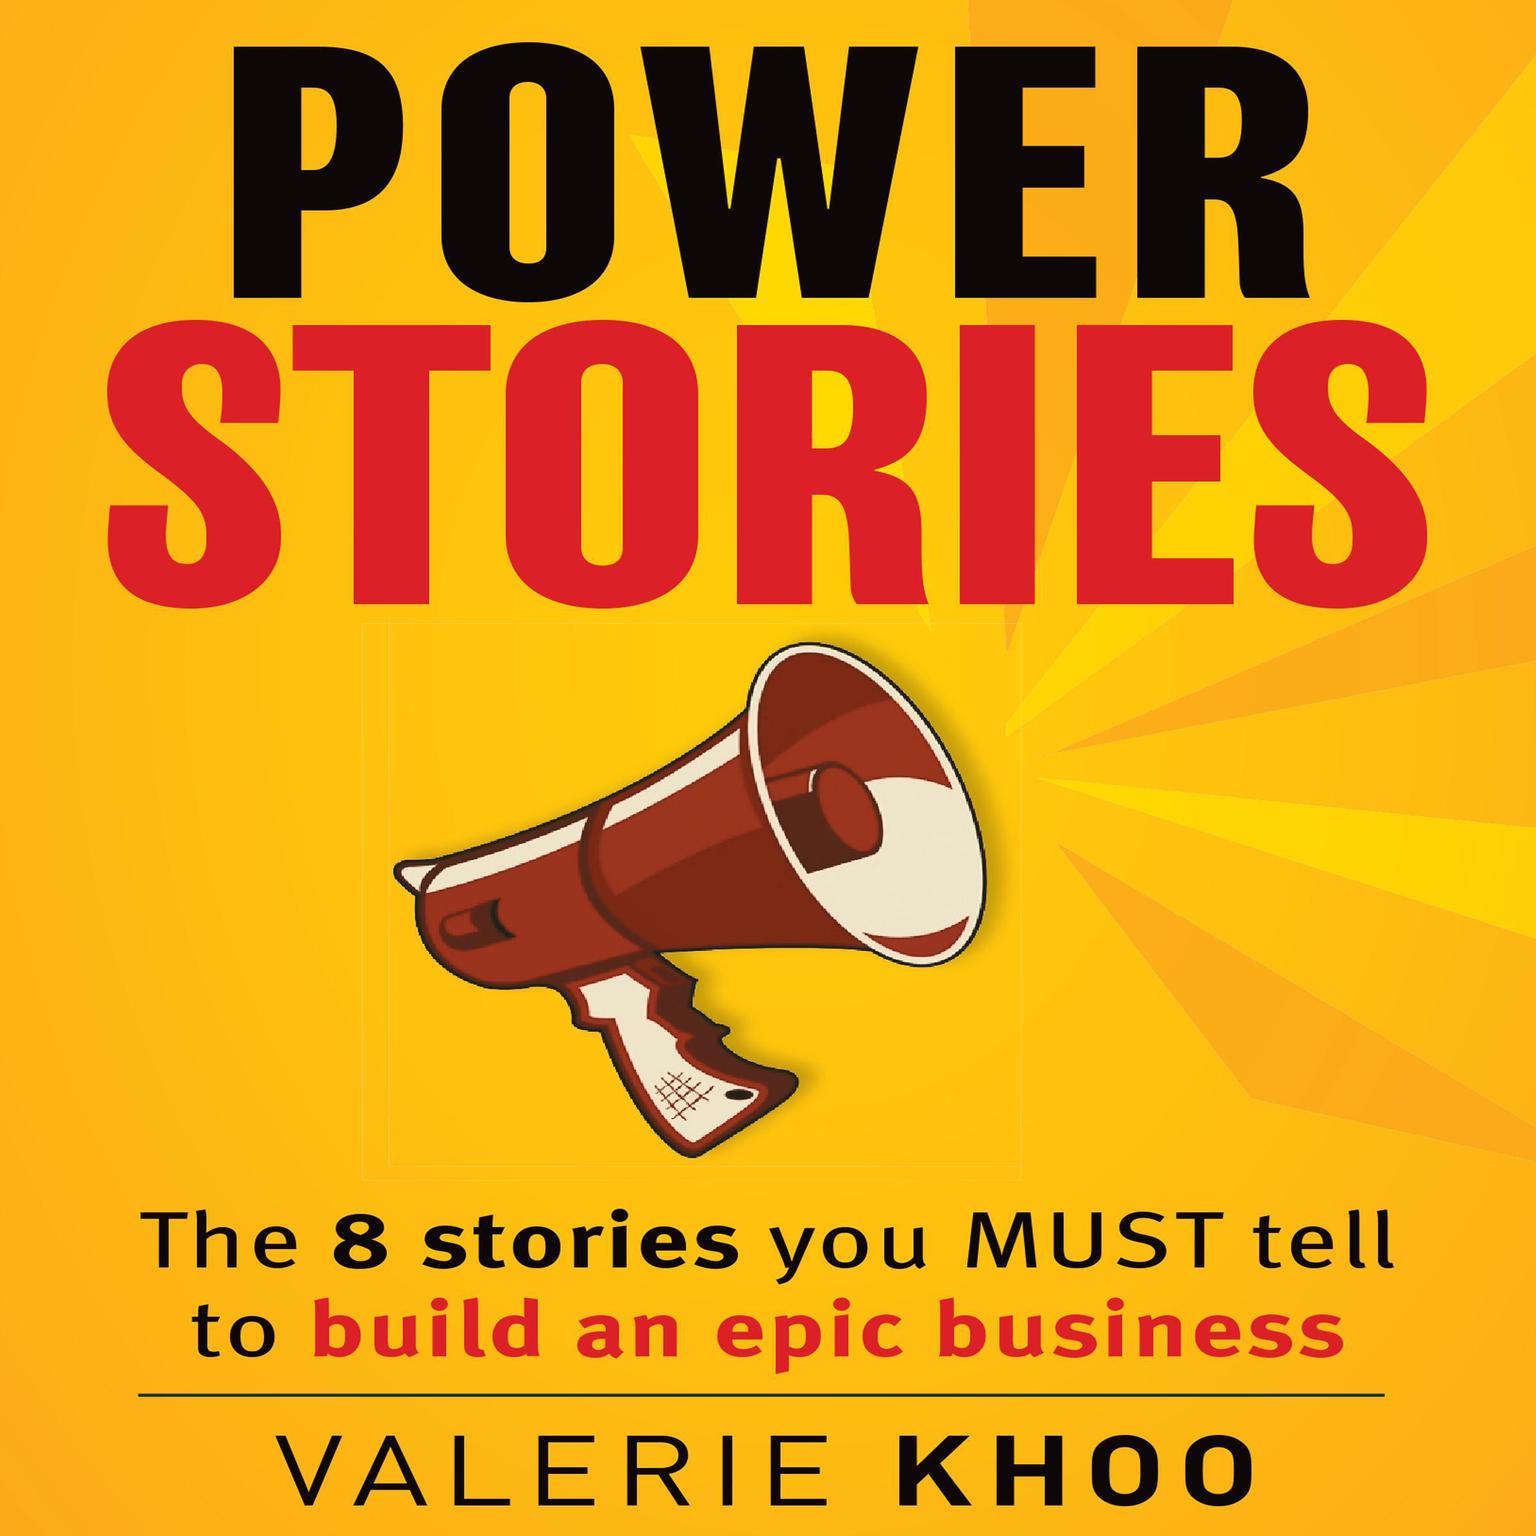 Power Stories: The 8 Stories You Must Tell to Build an Epic Business Audiobook, by Valerie Khoo